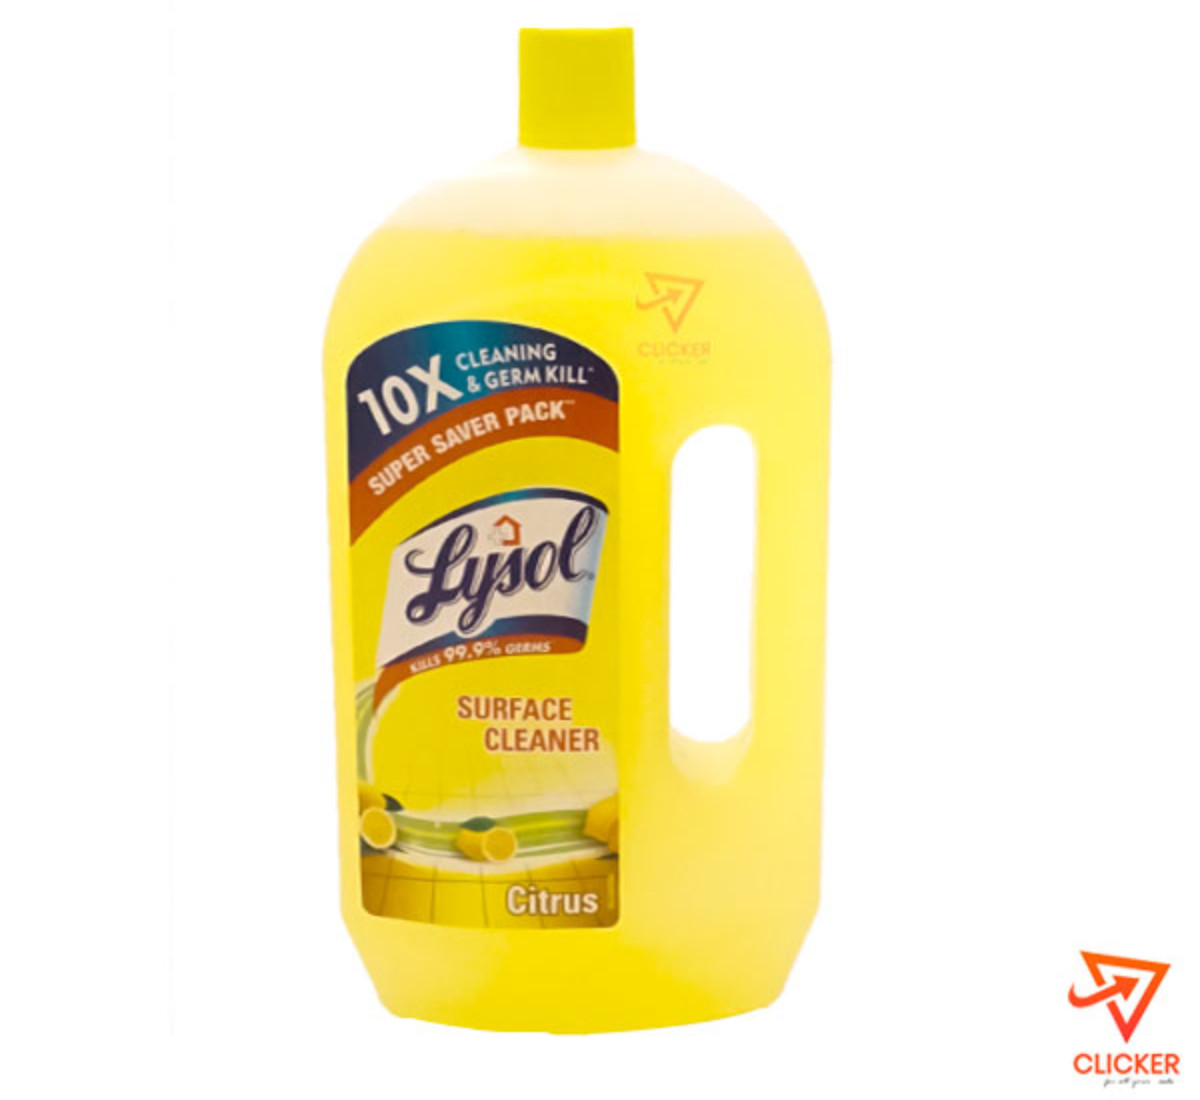 Clicker product 950ml LYSOL surface cleaner - Citrus 855